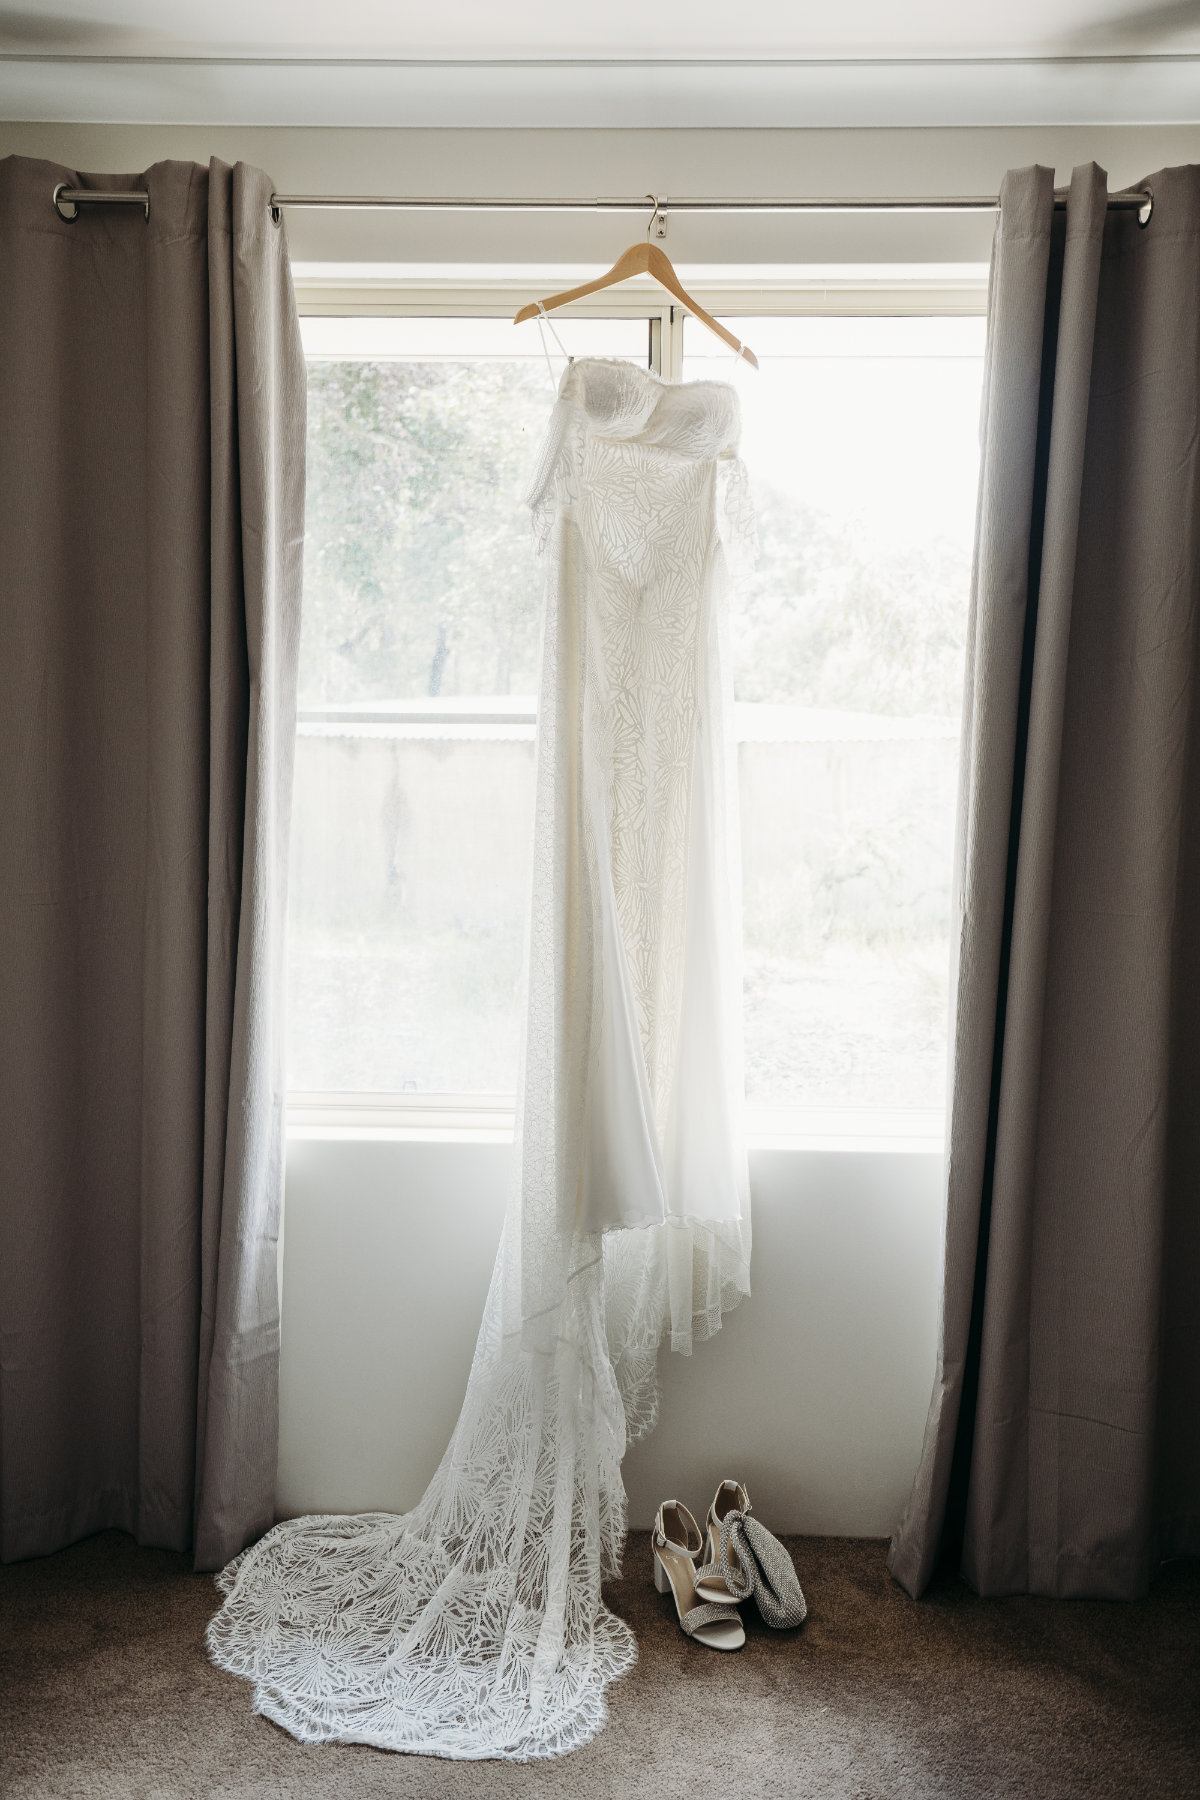 Lei and Rangis Rivendell Winery wedding by Stoked Photography40